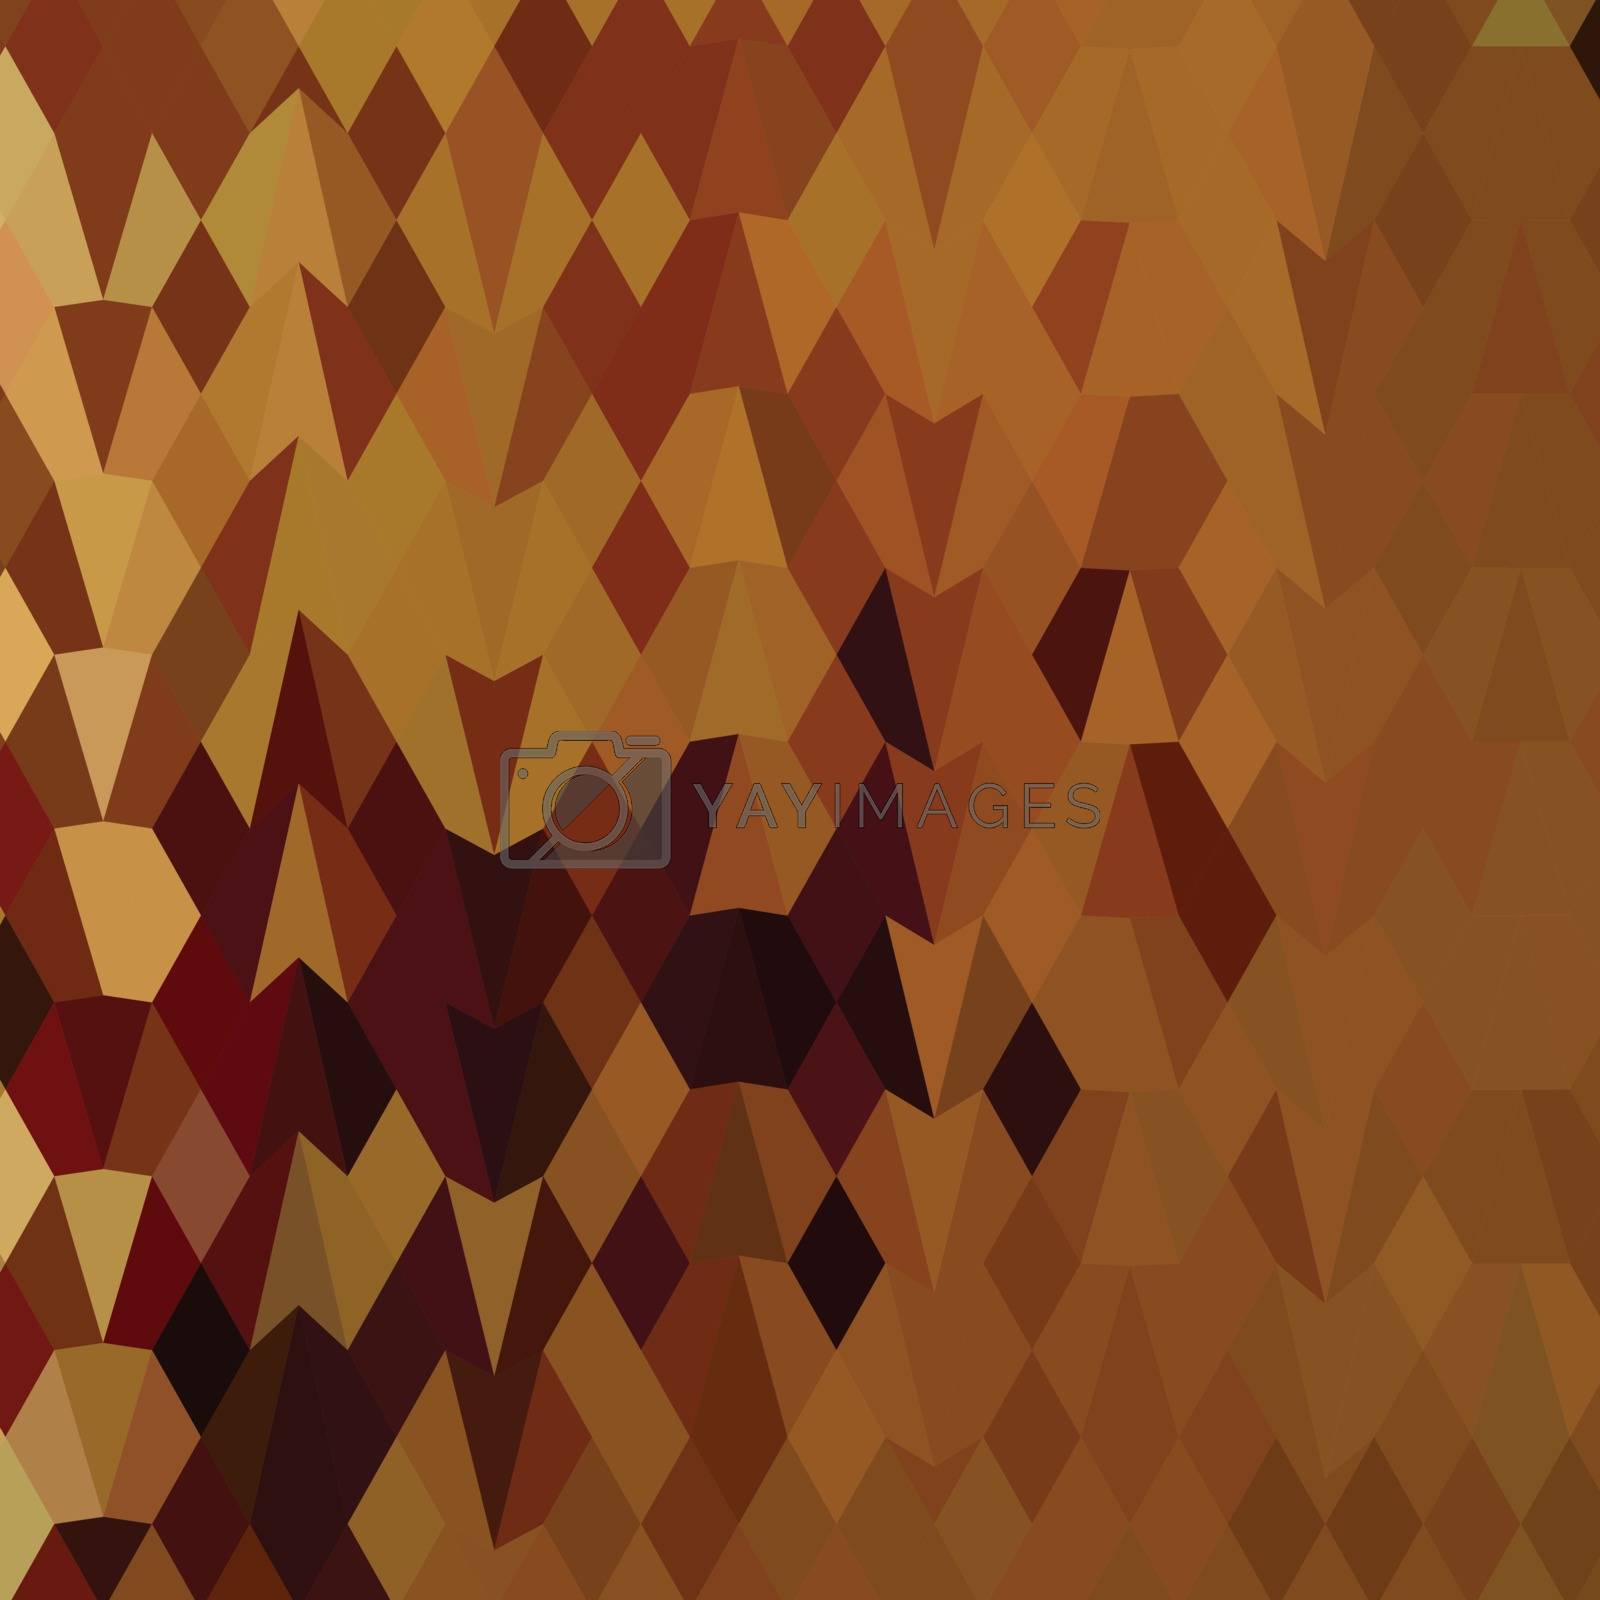 Royalty free image of Autumn Leaves Abstract Low Polygon Background by patrimonio